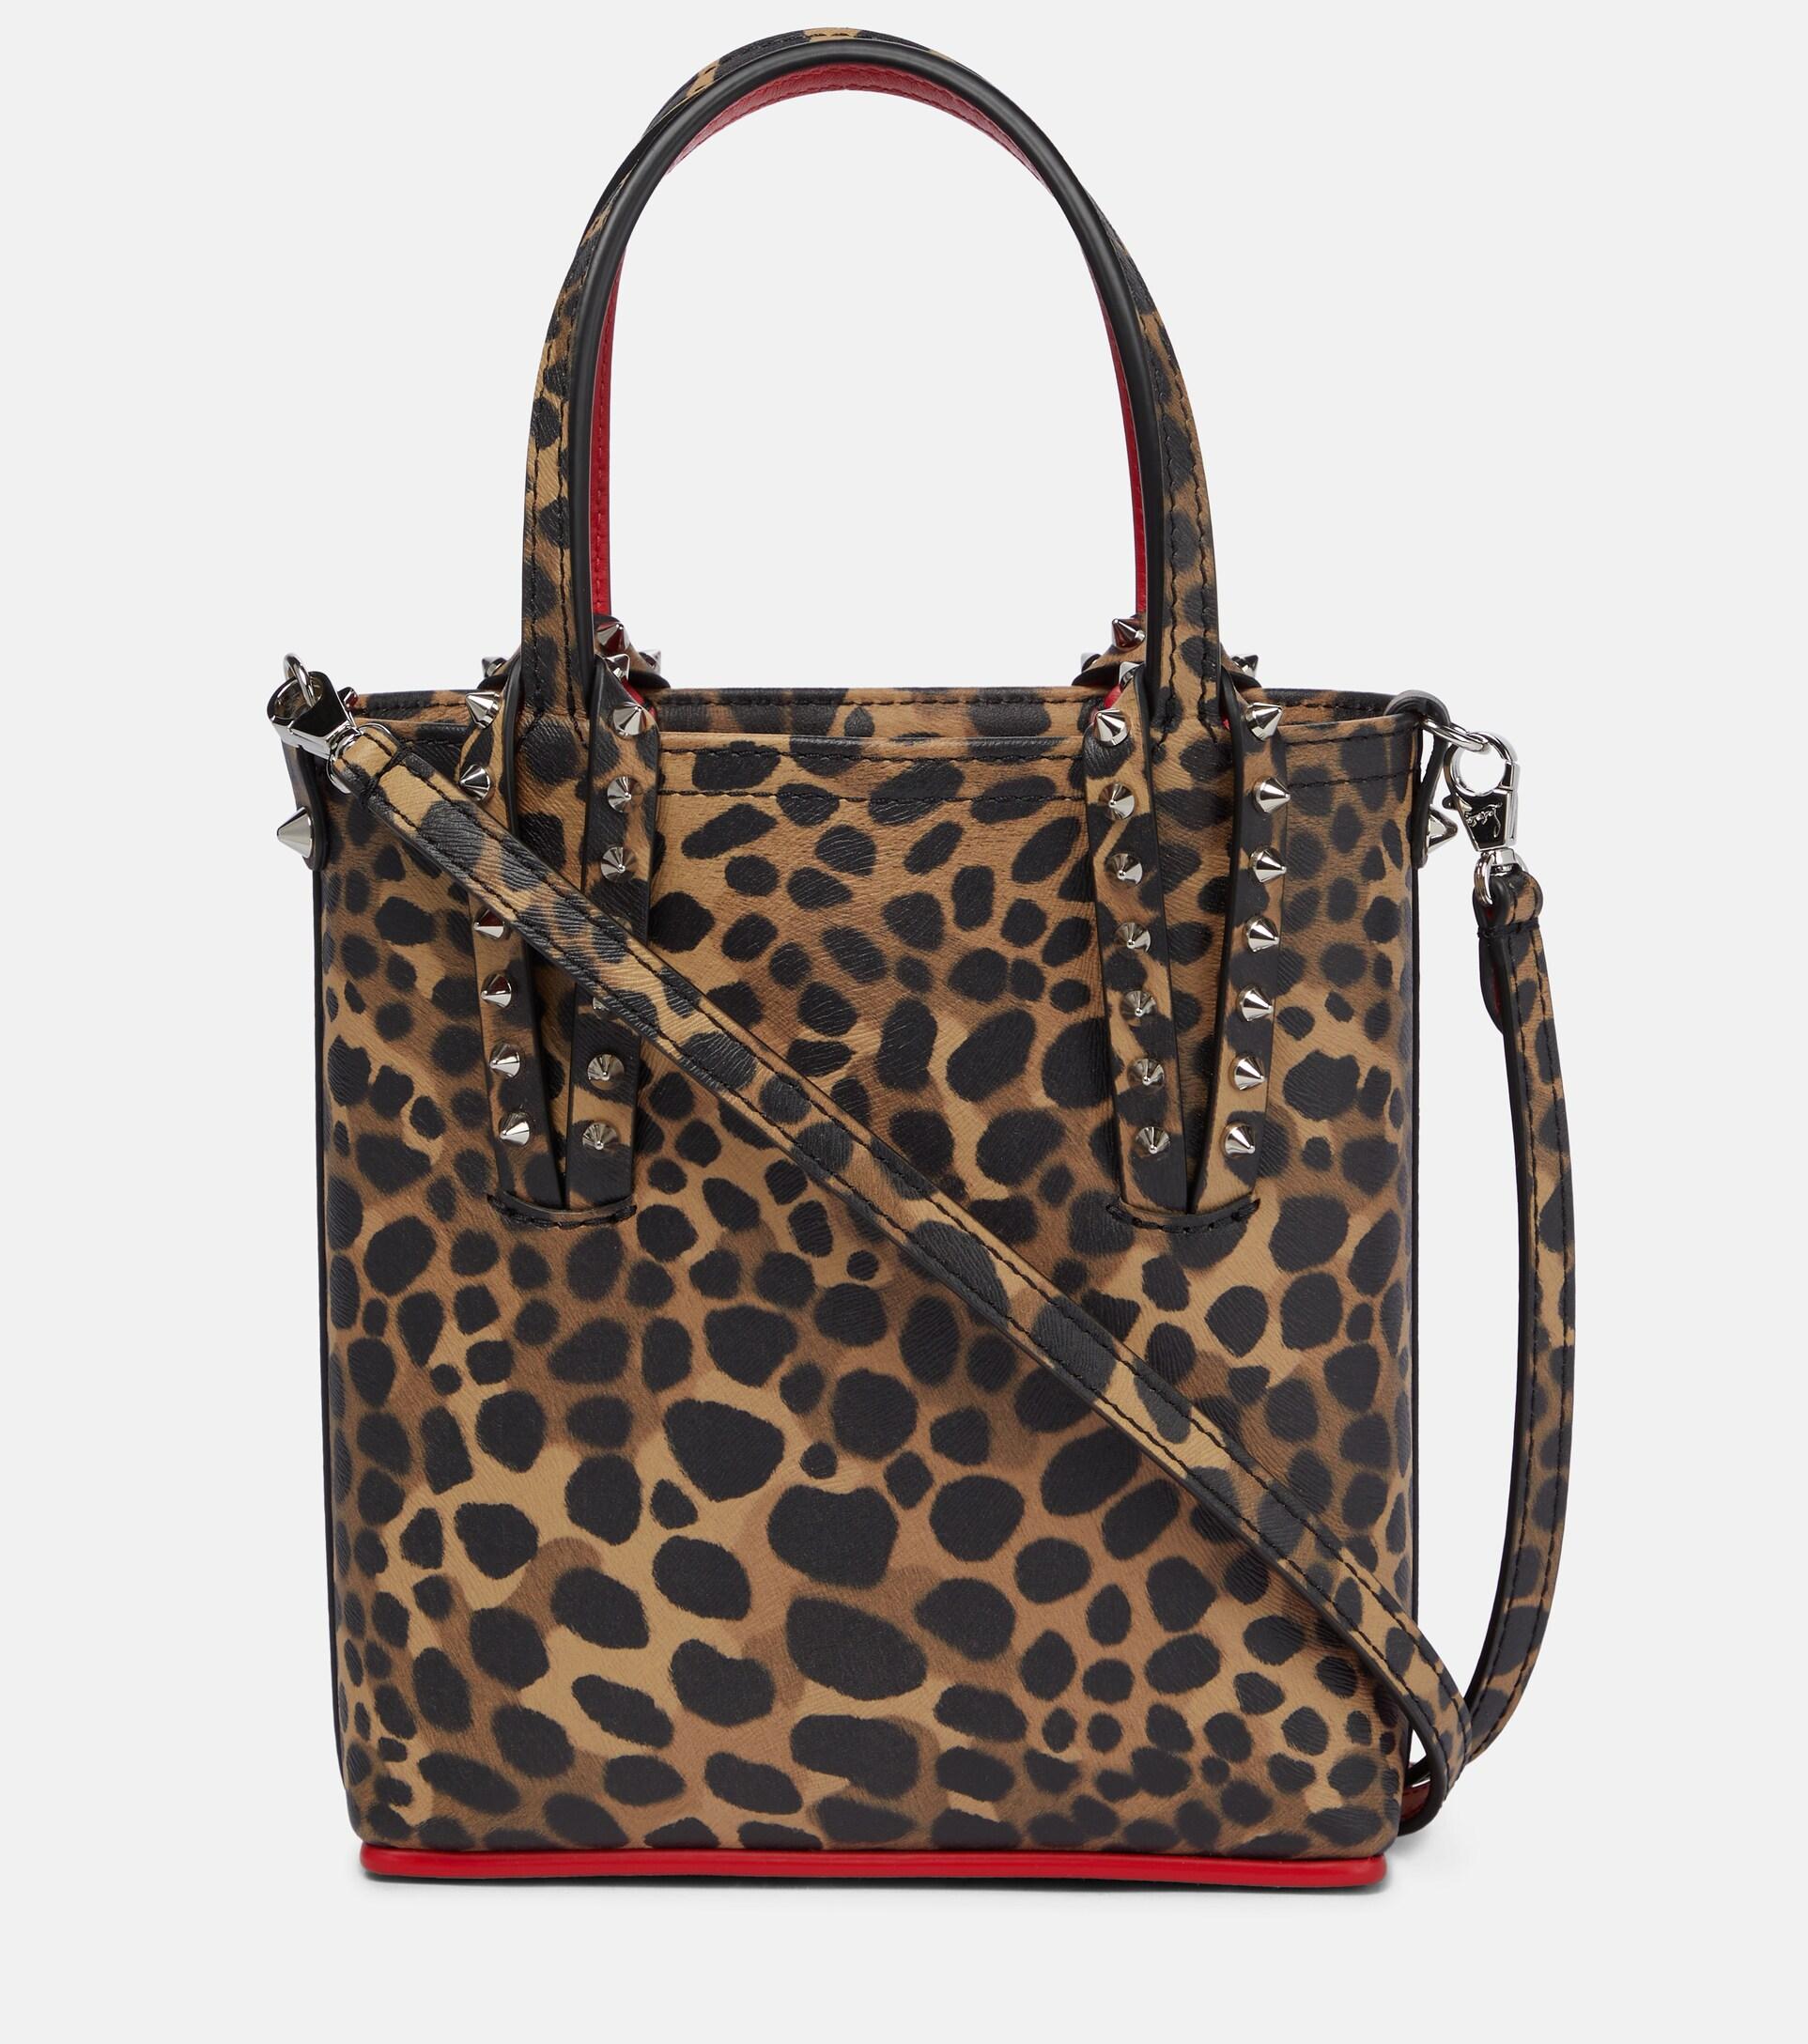 Christian Louboutin Cabata East-west Leather Tote Bag in Brown